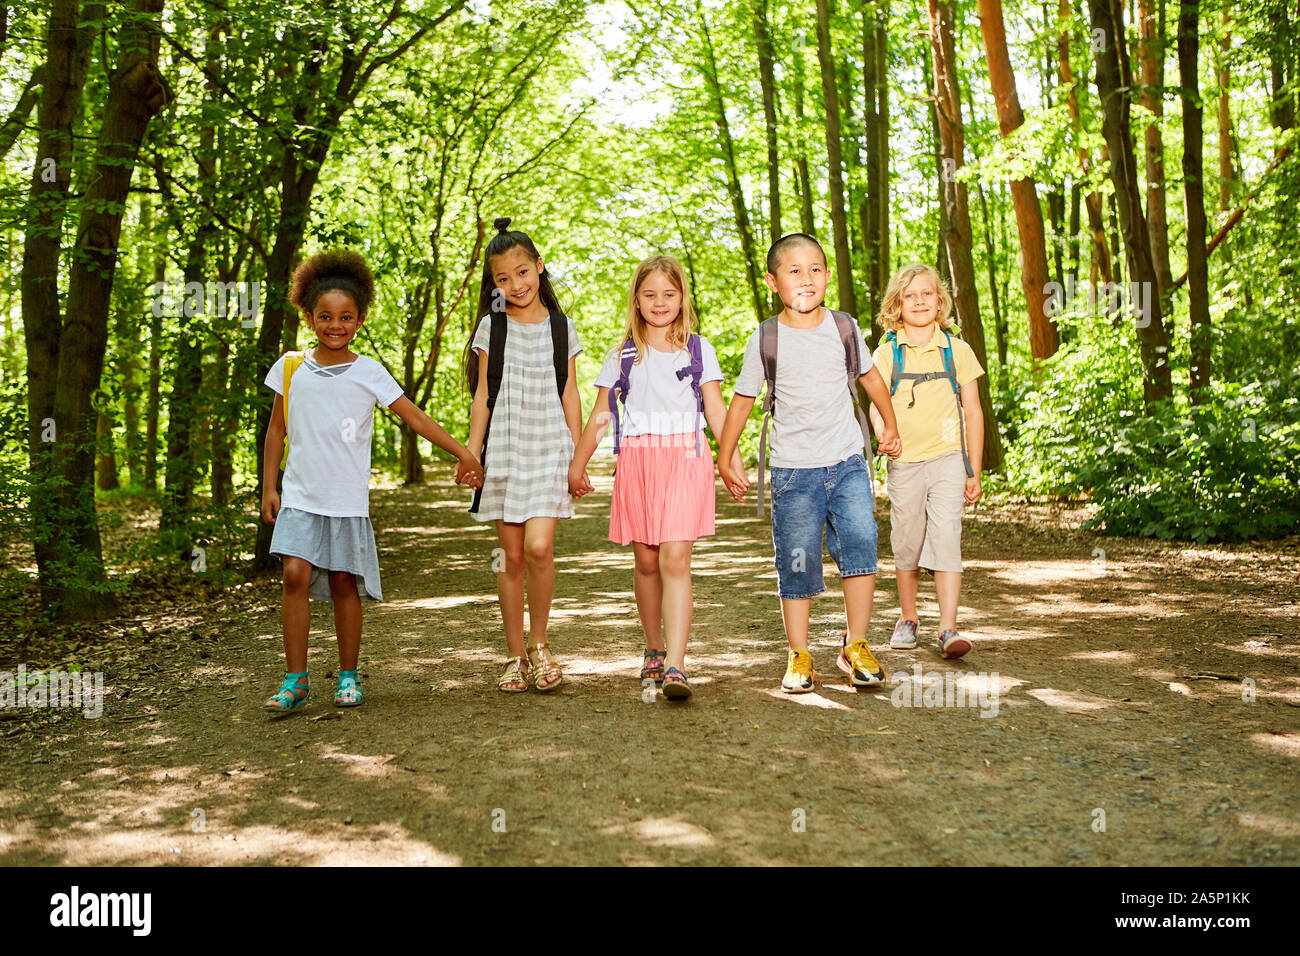 Group of multicultural kids with backpack on hiking day in nature Stock Photo